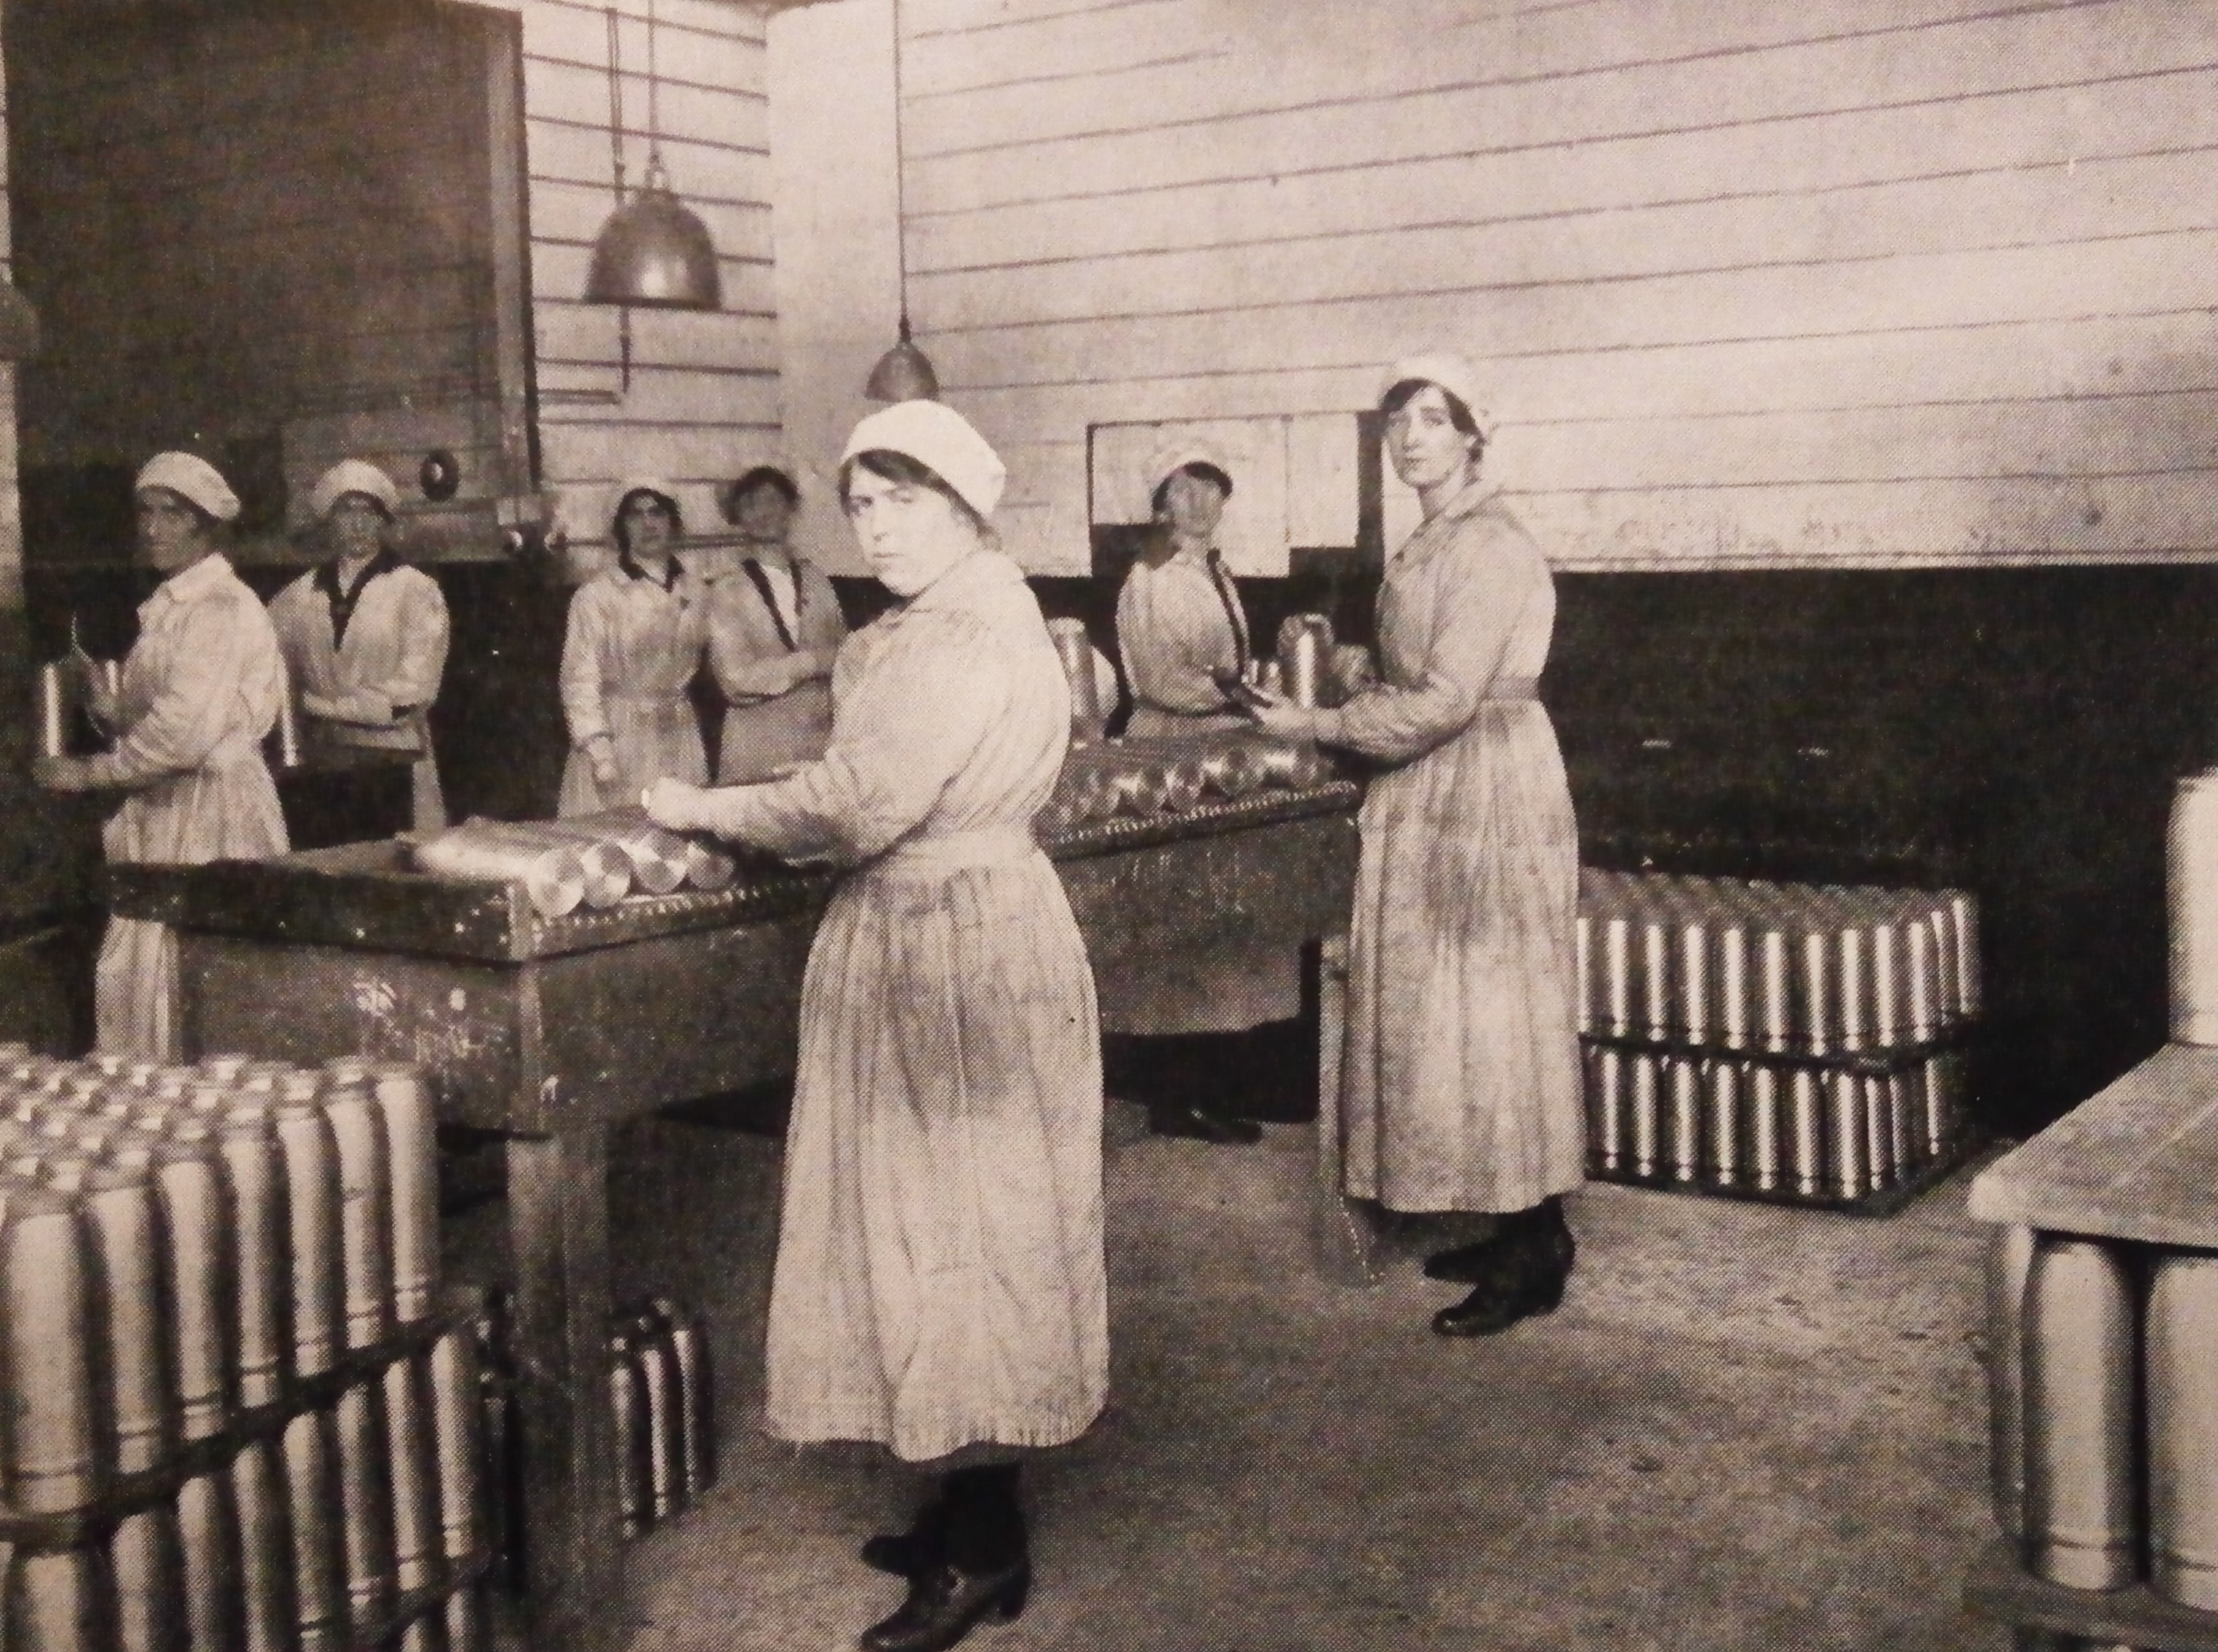 Mary Johnson (to right of photo)- Munitions Worker